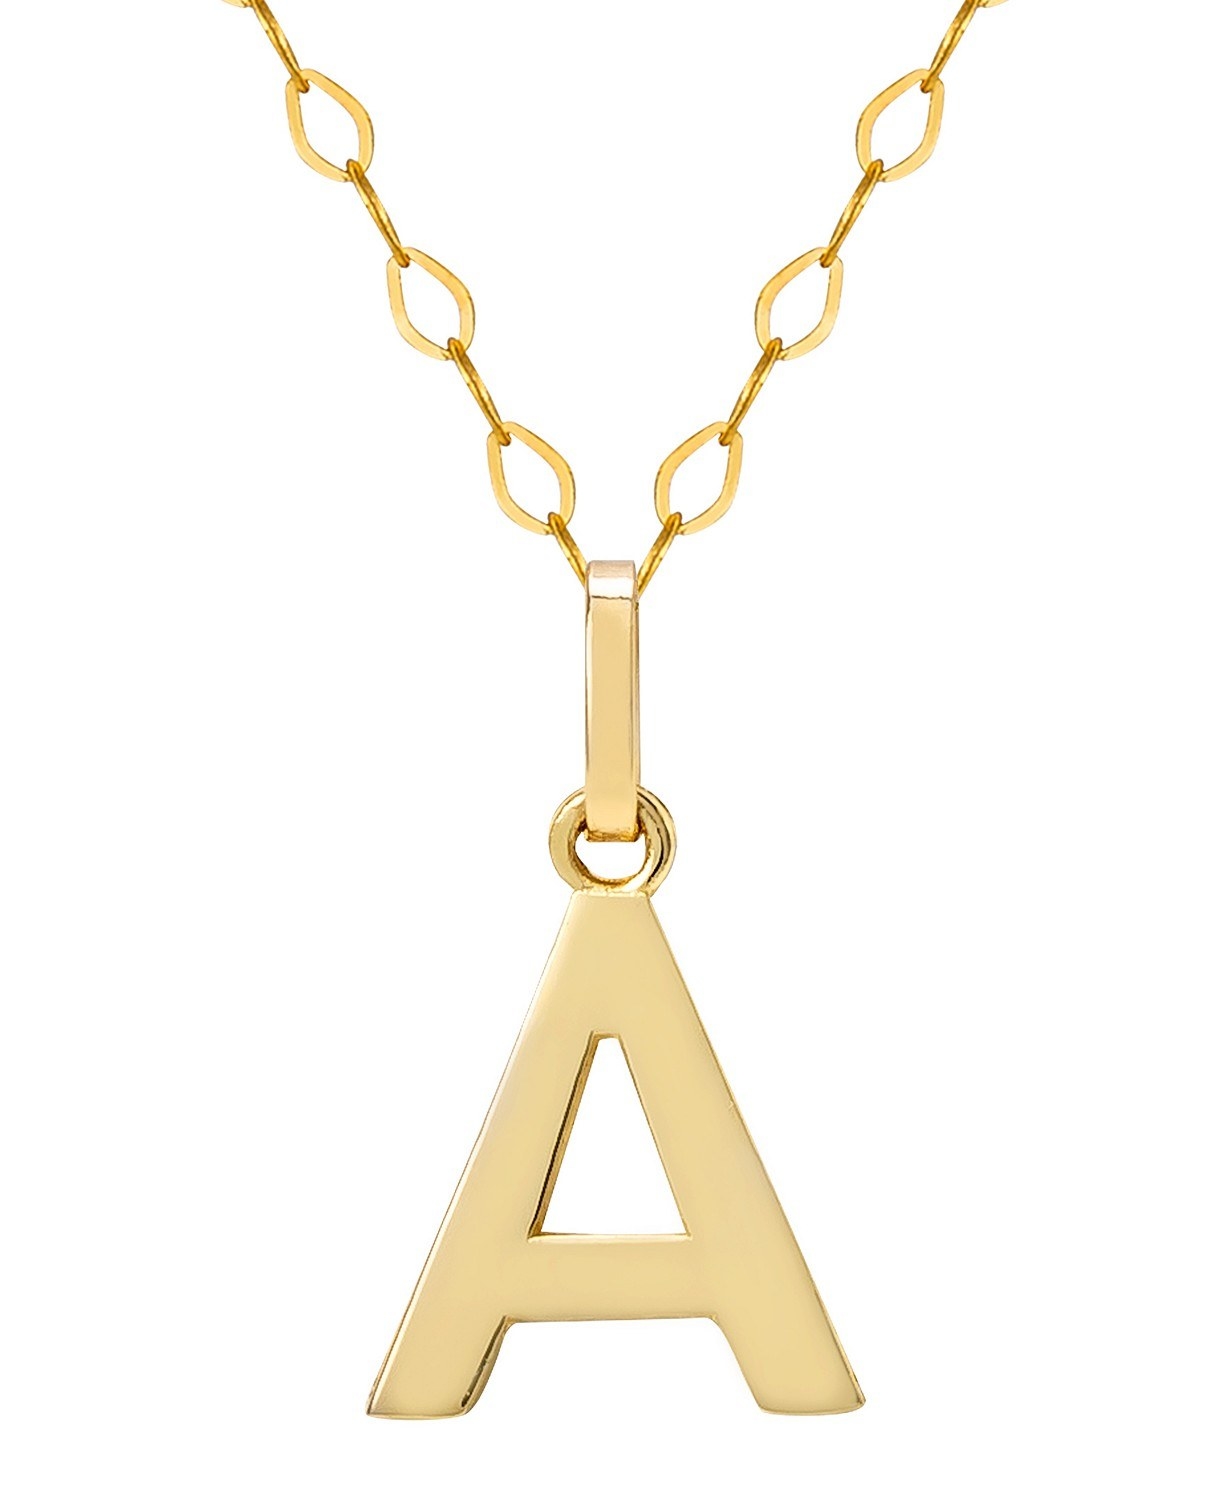 A gold pendant necklace with the letter A on a chain link